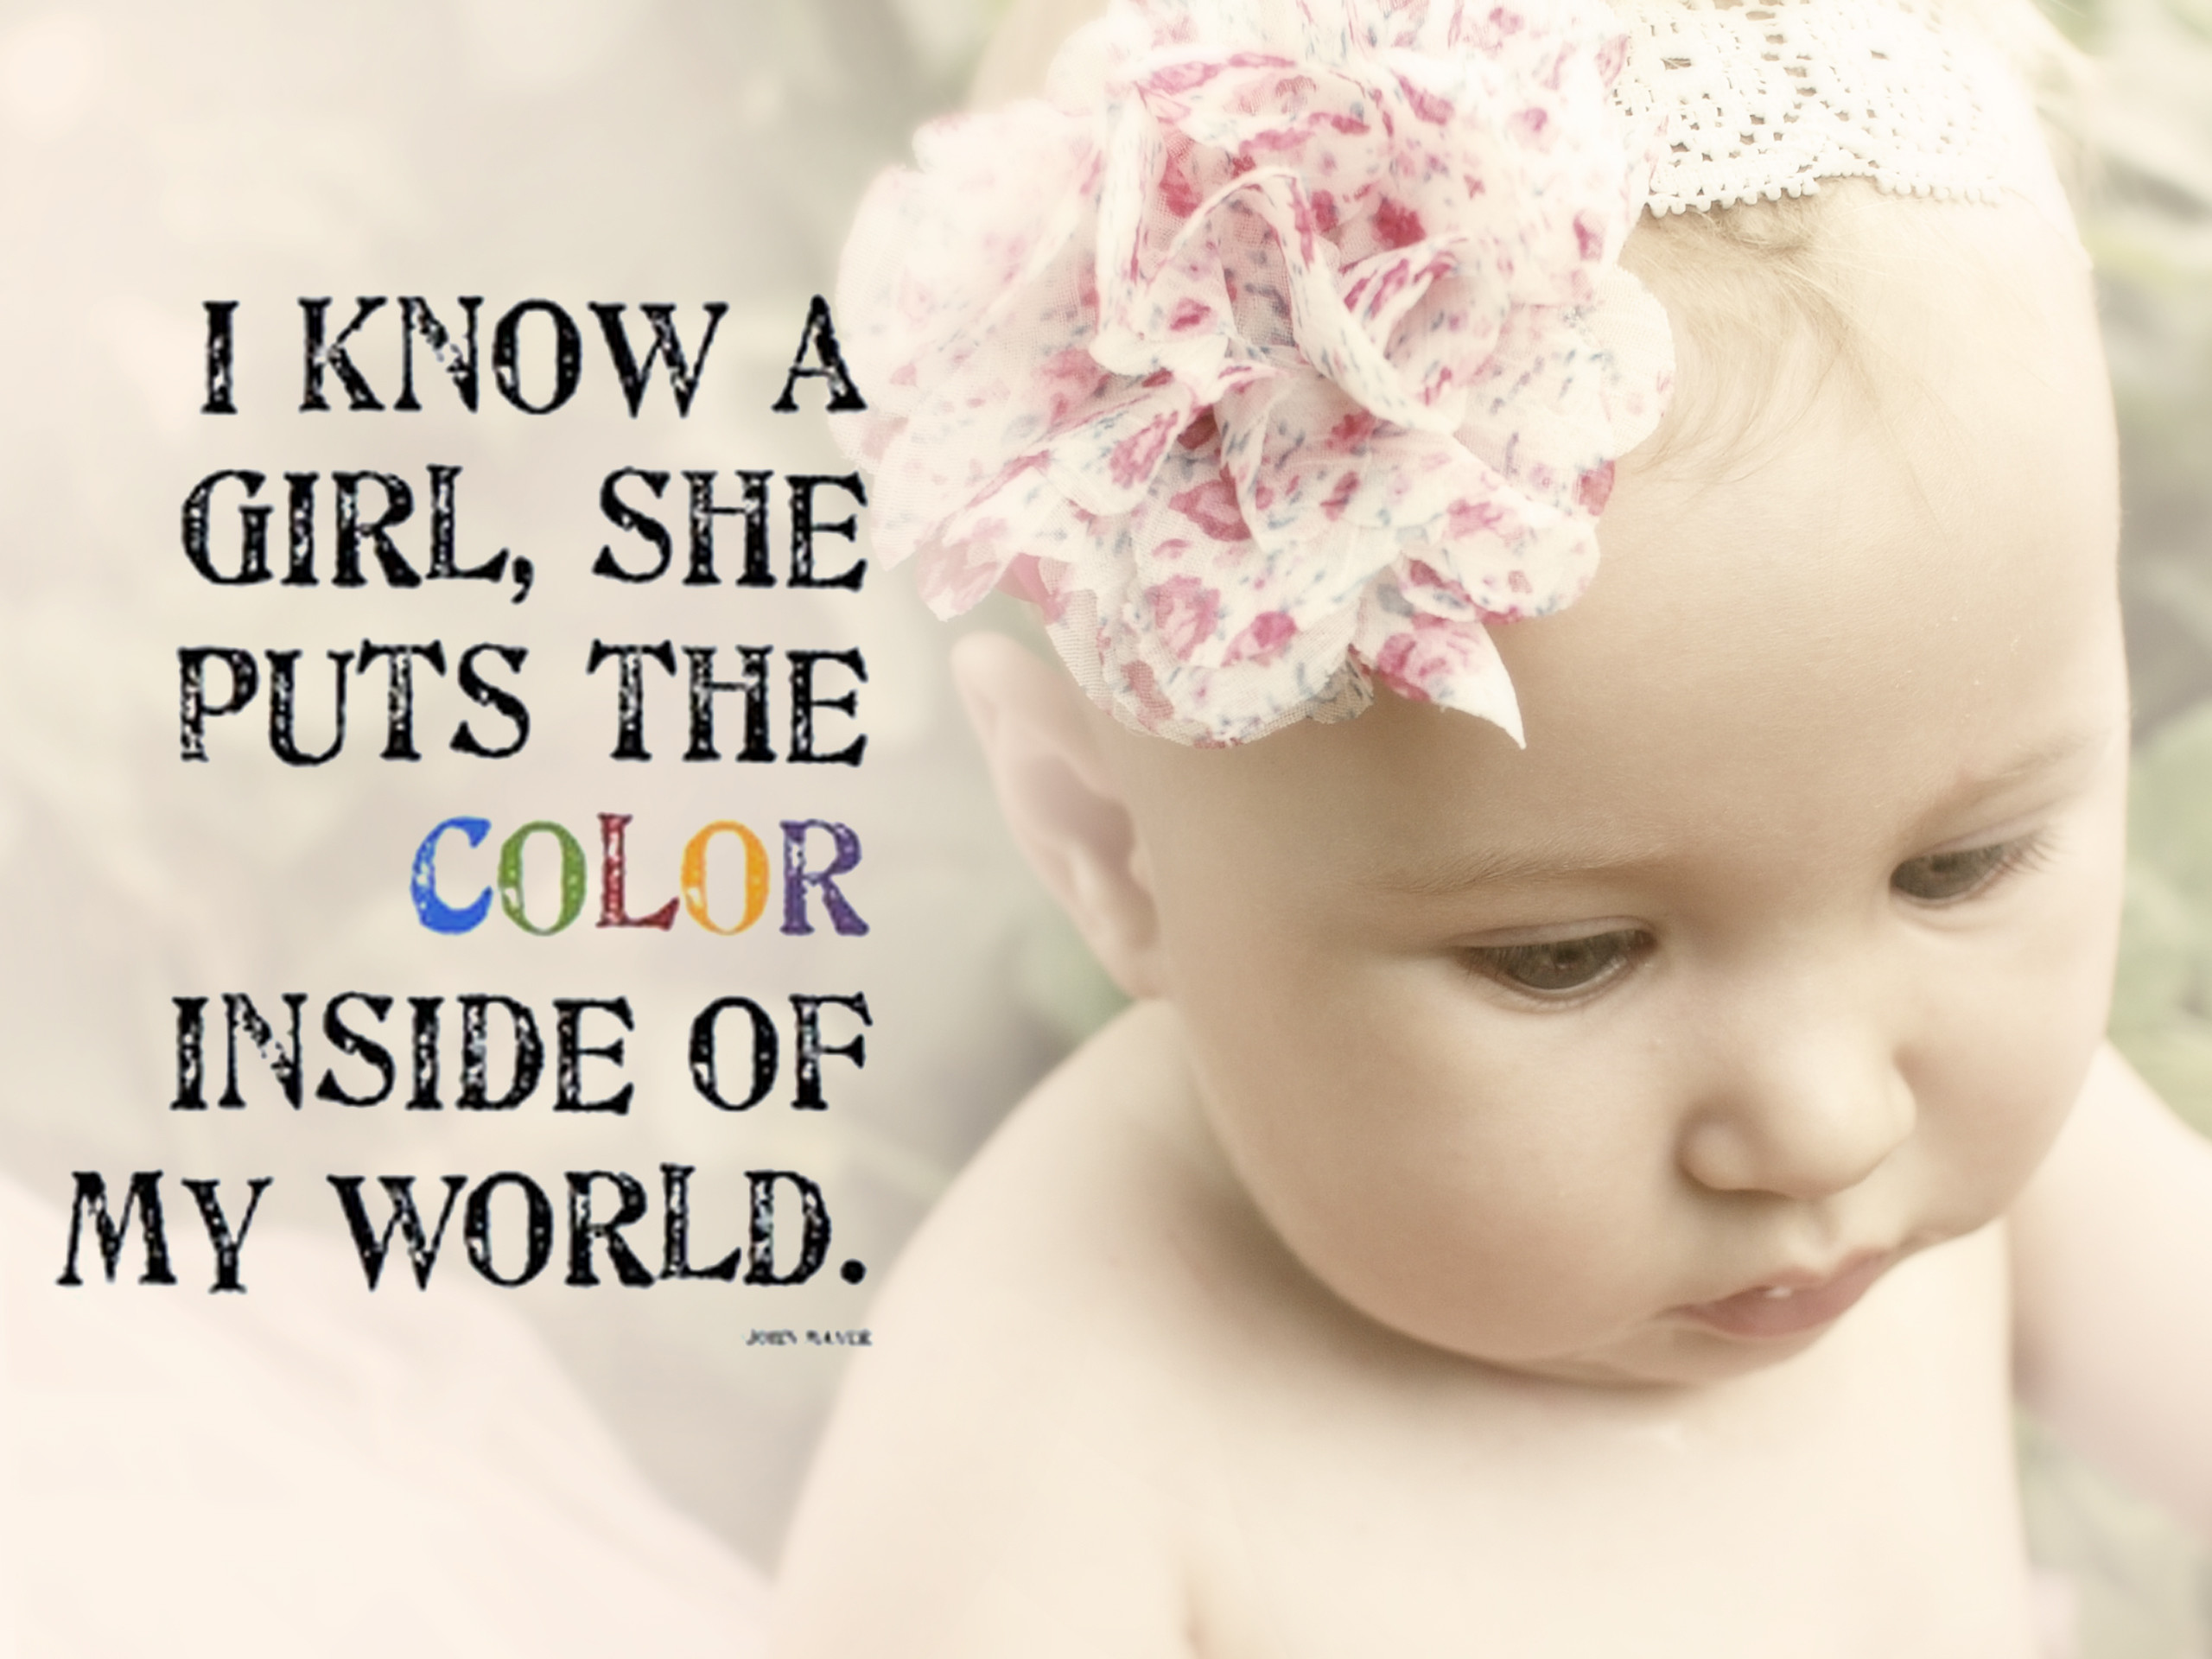 Baby girl i know what want. About Baby. Baby girl World. Words about Baby. Picture Baby quotes.